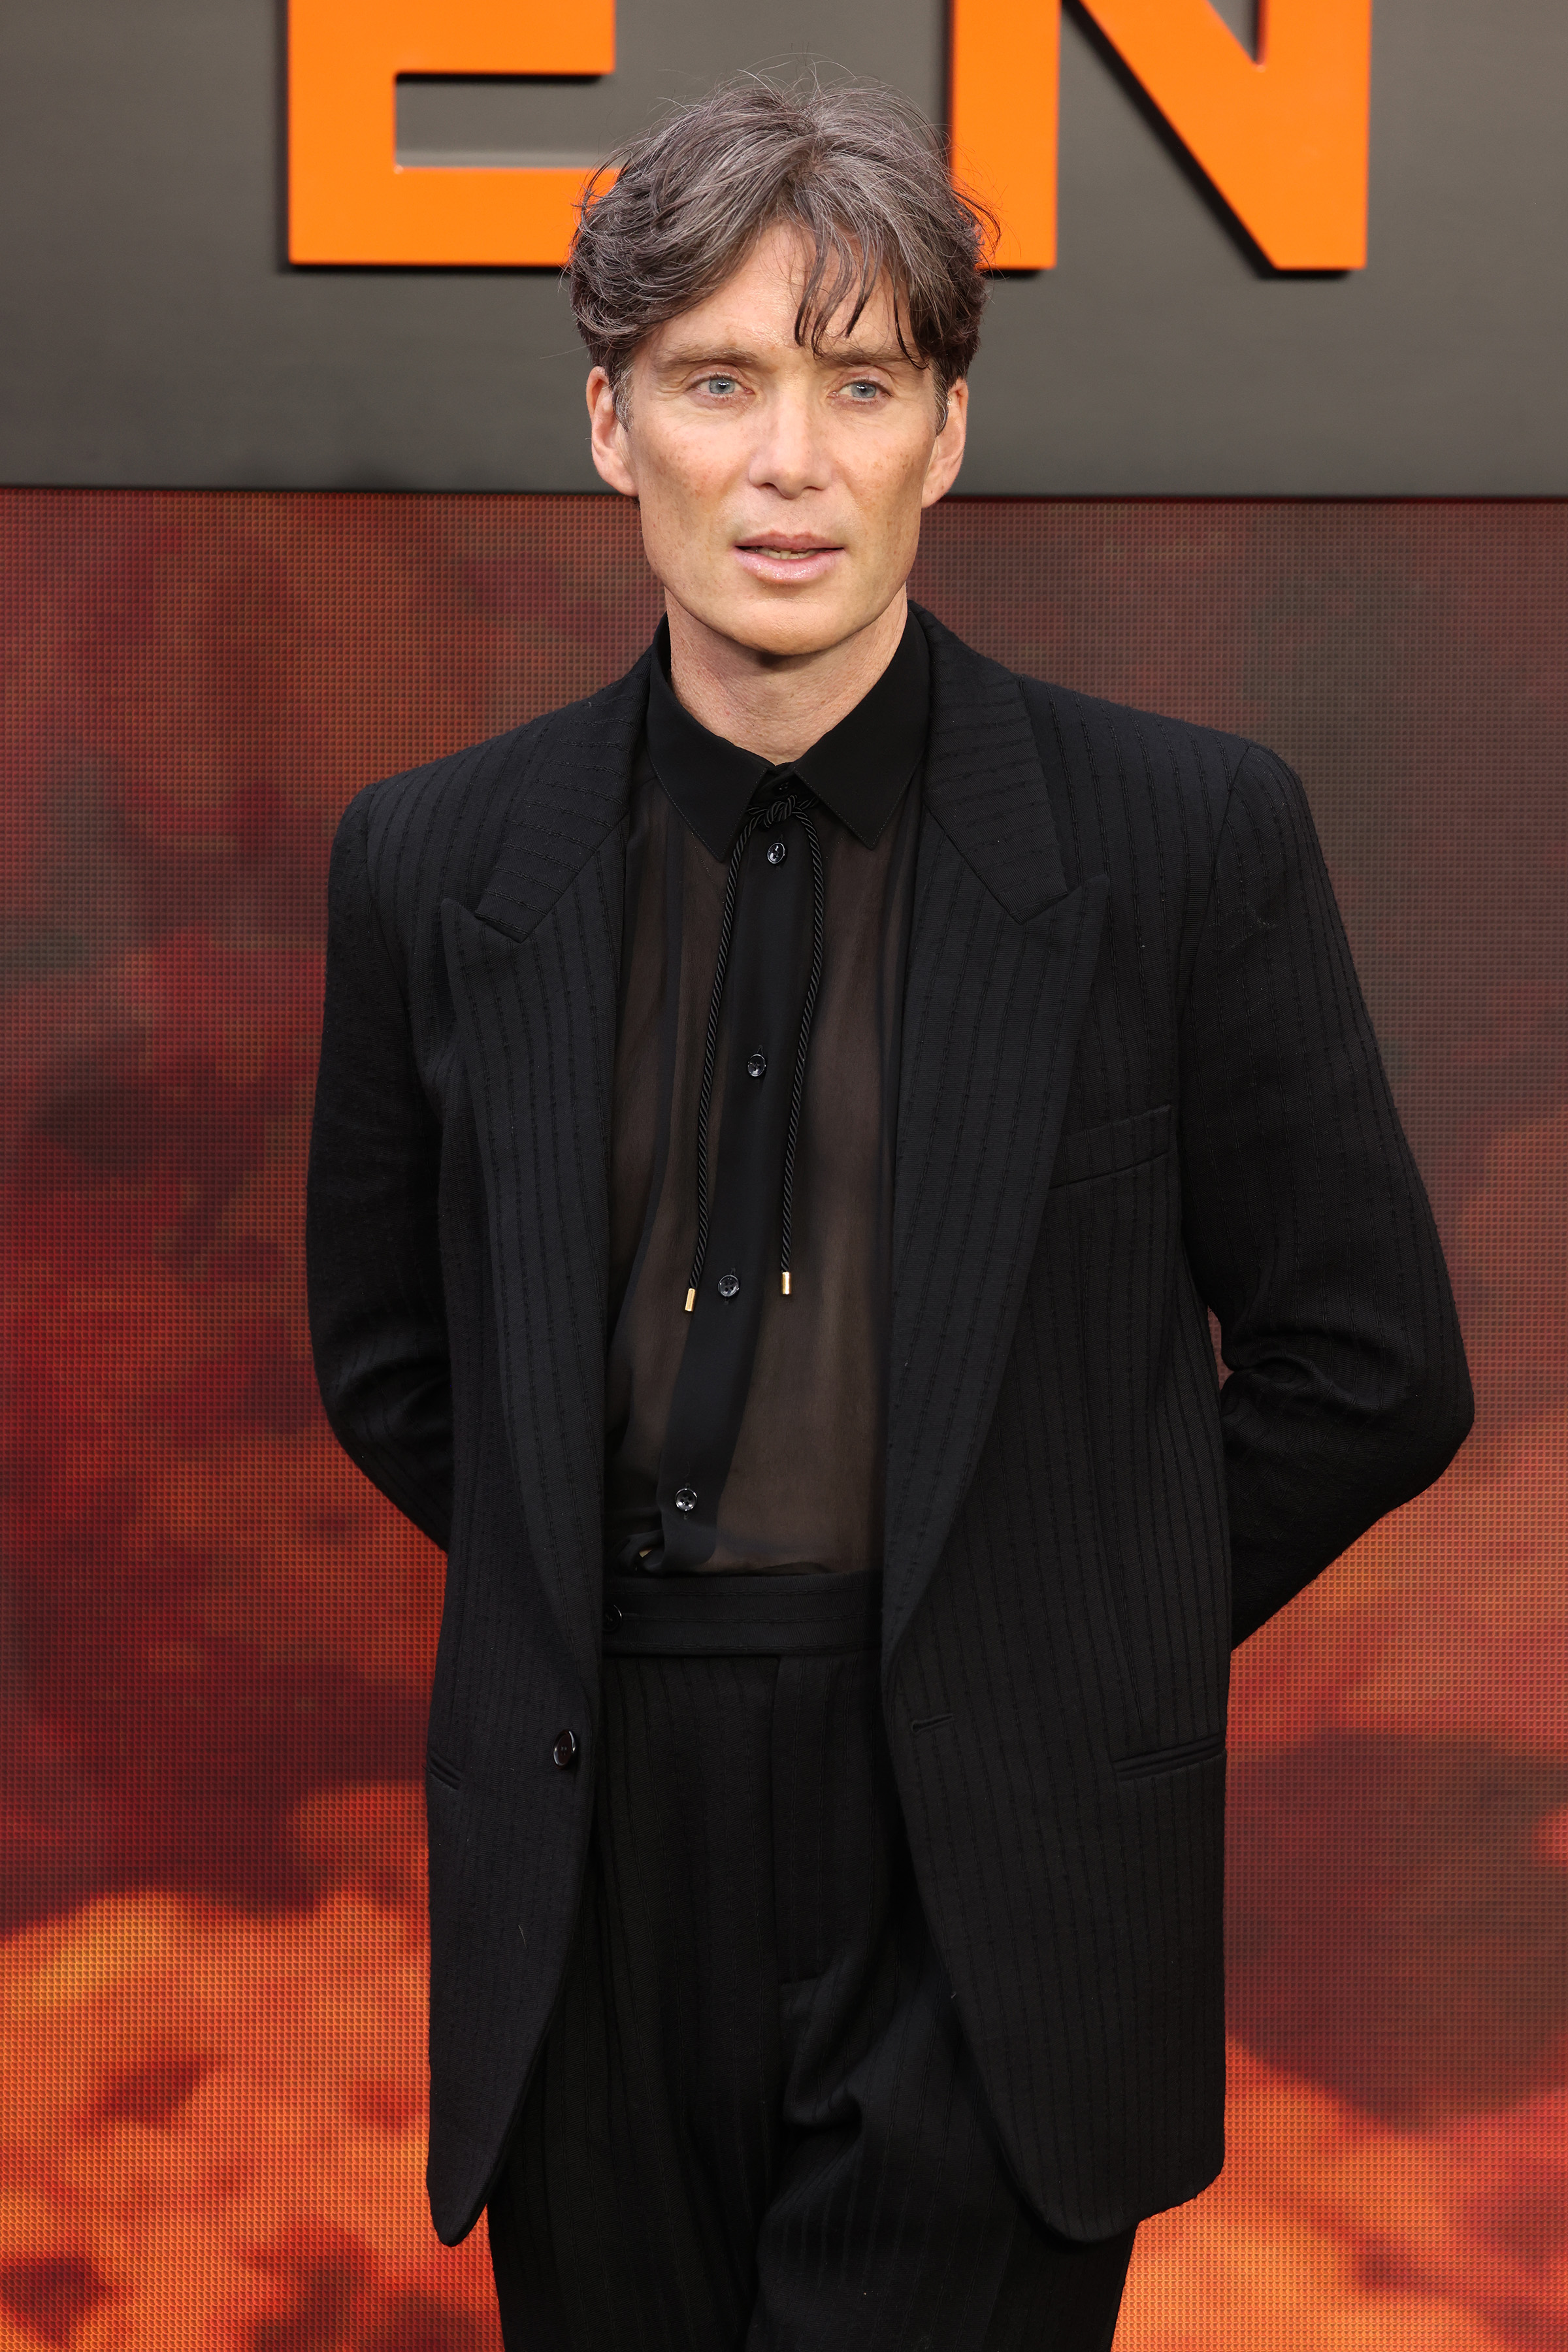 Cillian Murphy's name has also been on the lips of spy fans